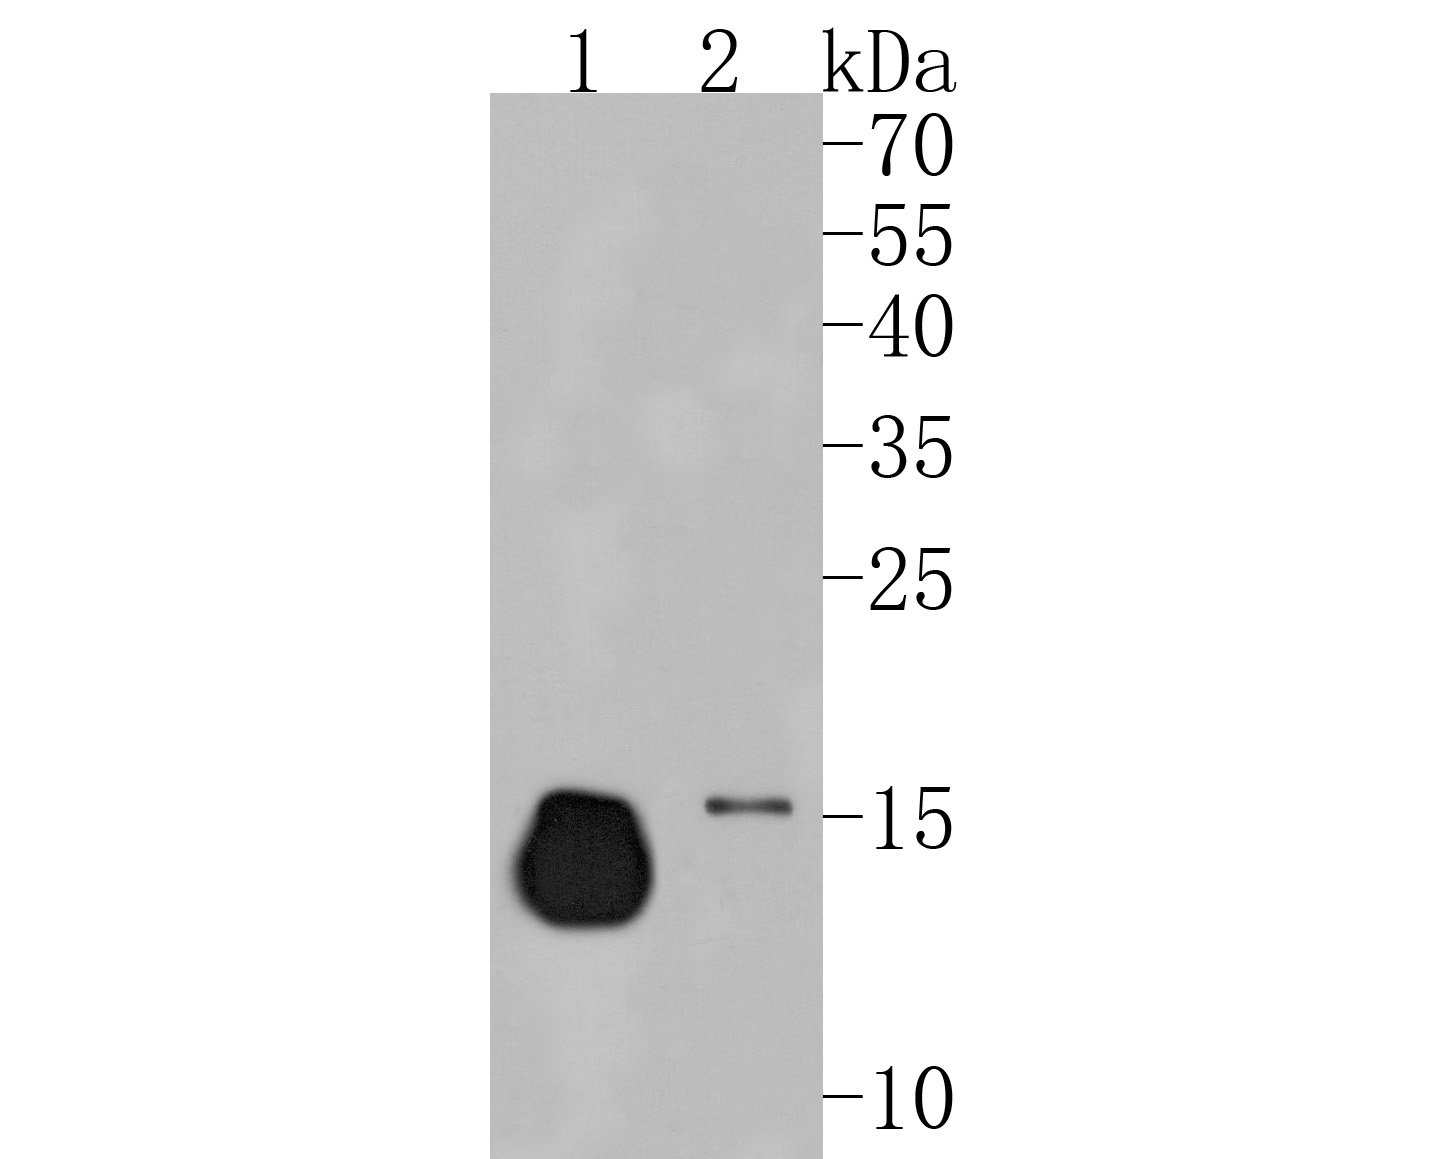 Western blot analysis of Ly6c on different lysates. Proteins were transferred to a PVDF membrane and blocked with 5% BSA in PBS for 1 hour at room temperature. The primary antibody (HA500088, 1/500) was used in 5% BSA at room temperature for 2 hours. Goat Anti-Rabbit IgG - HRP Secondary Antibody (HA1001) at 1:5,000 dilution was used for 1 hour at room temperature.<br />
Positive control: <br />
Lane 1: Mouse lung tissue lysate<br />
Lane 2: Mouse cerebellum tissue lysate